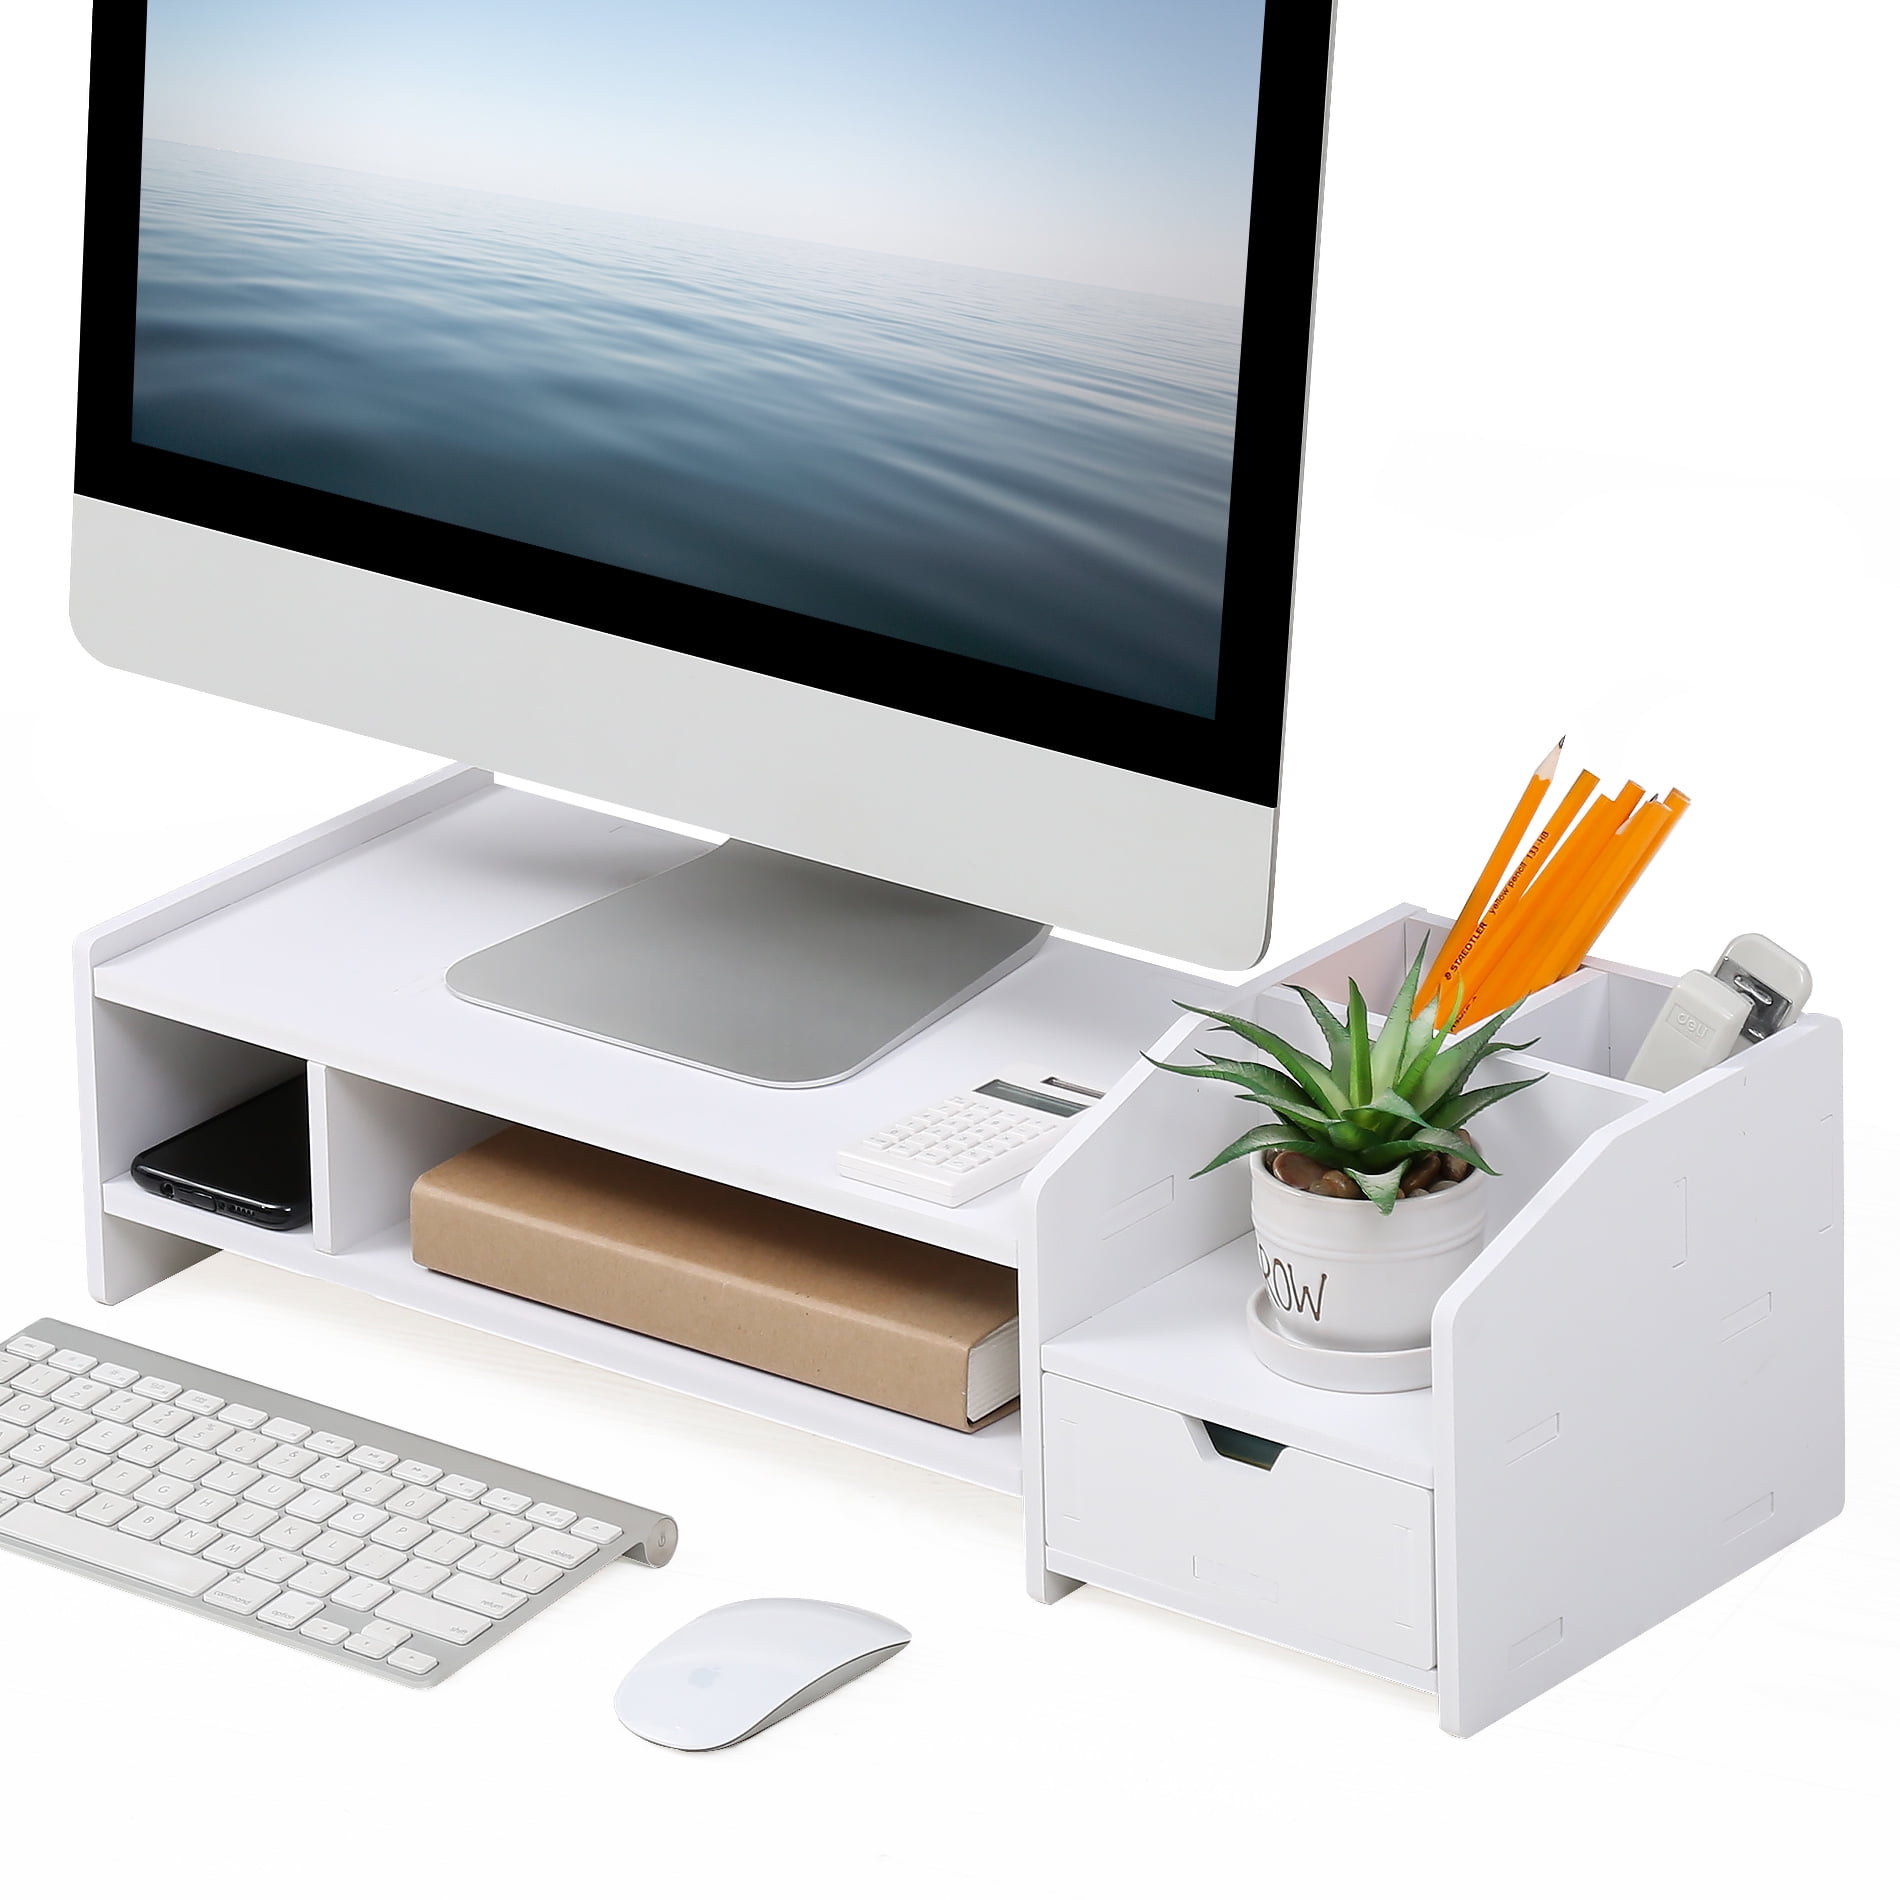 Fitueyes Computer Monitor Riser Laptop Stand With 2 Tier Desktop